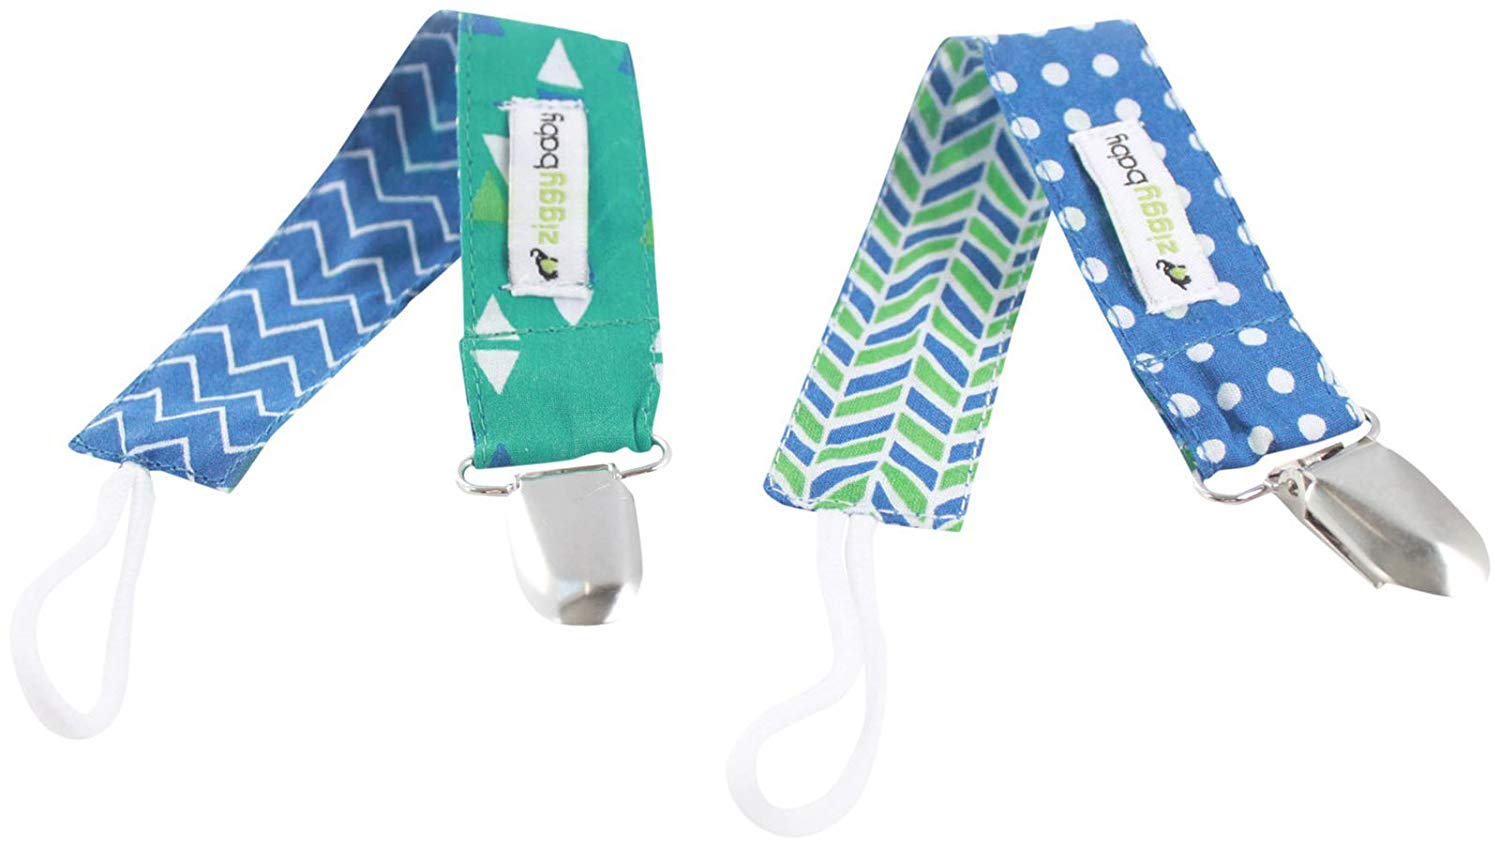 Designer pacifier clips and clothing for babies.